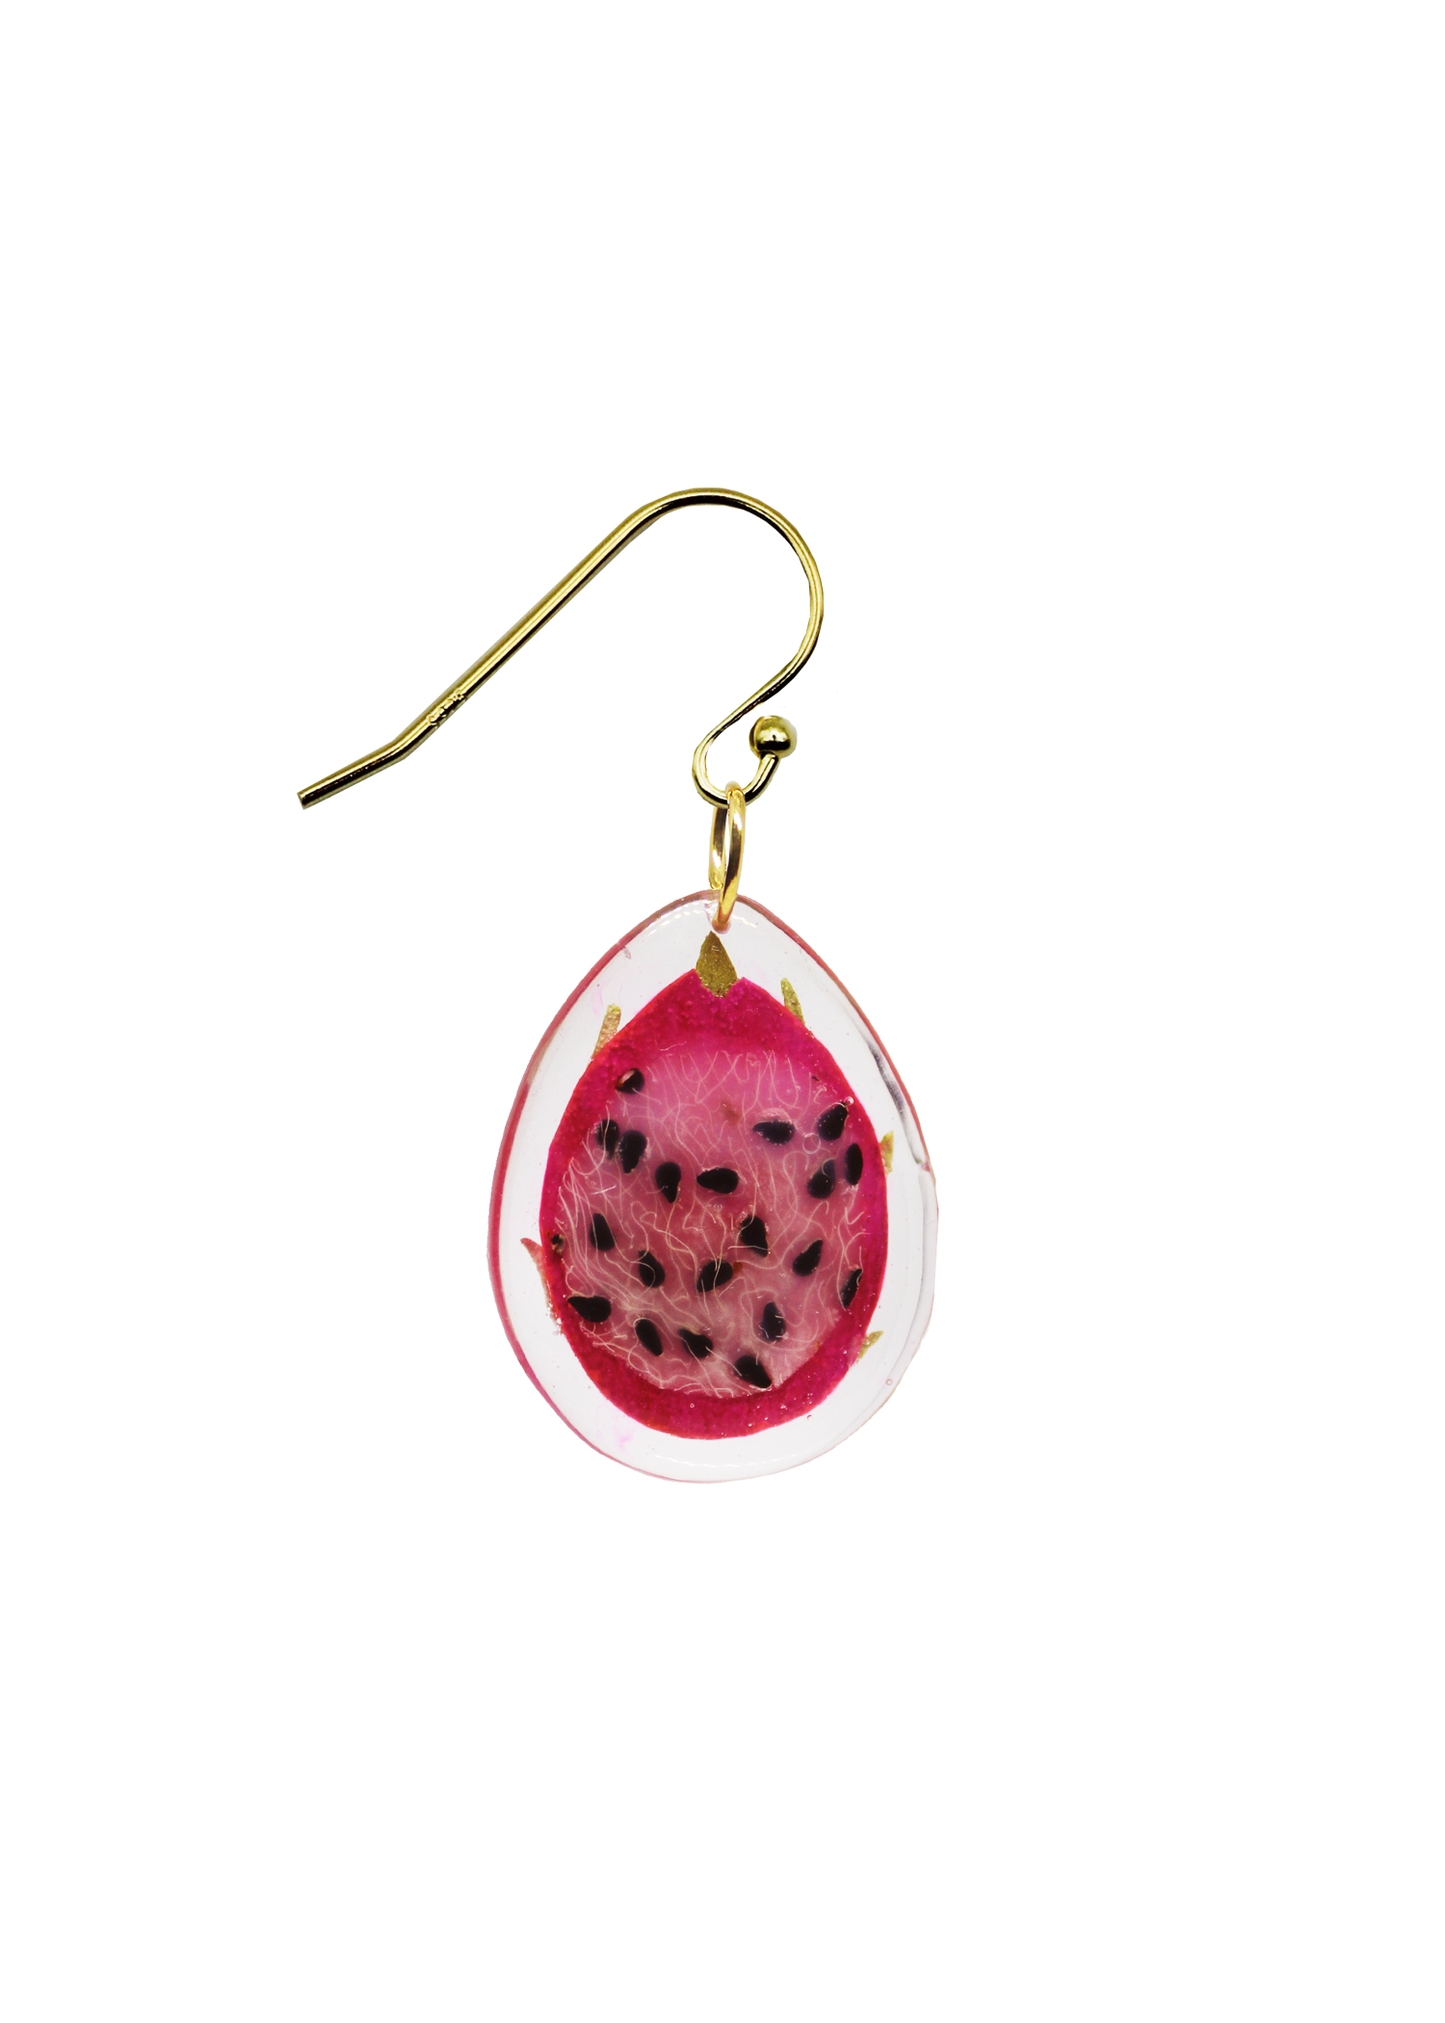 Resin Coated Miniature Pink Dragon Fruit on a French Hook earring